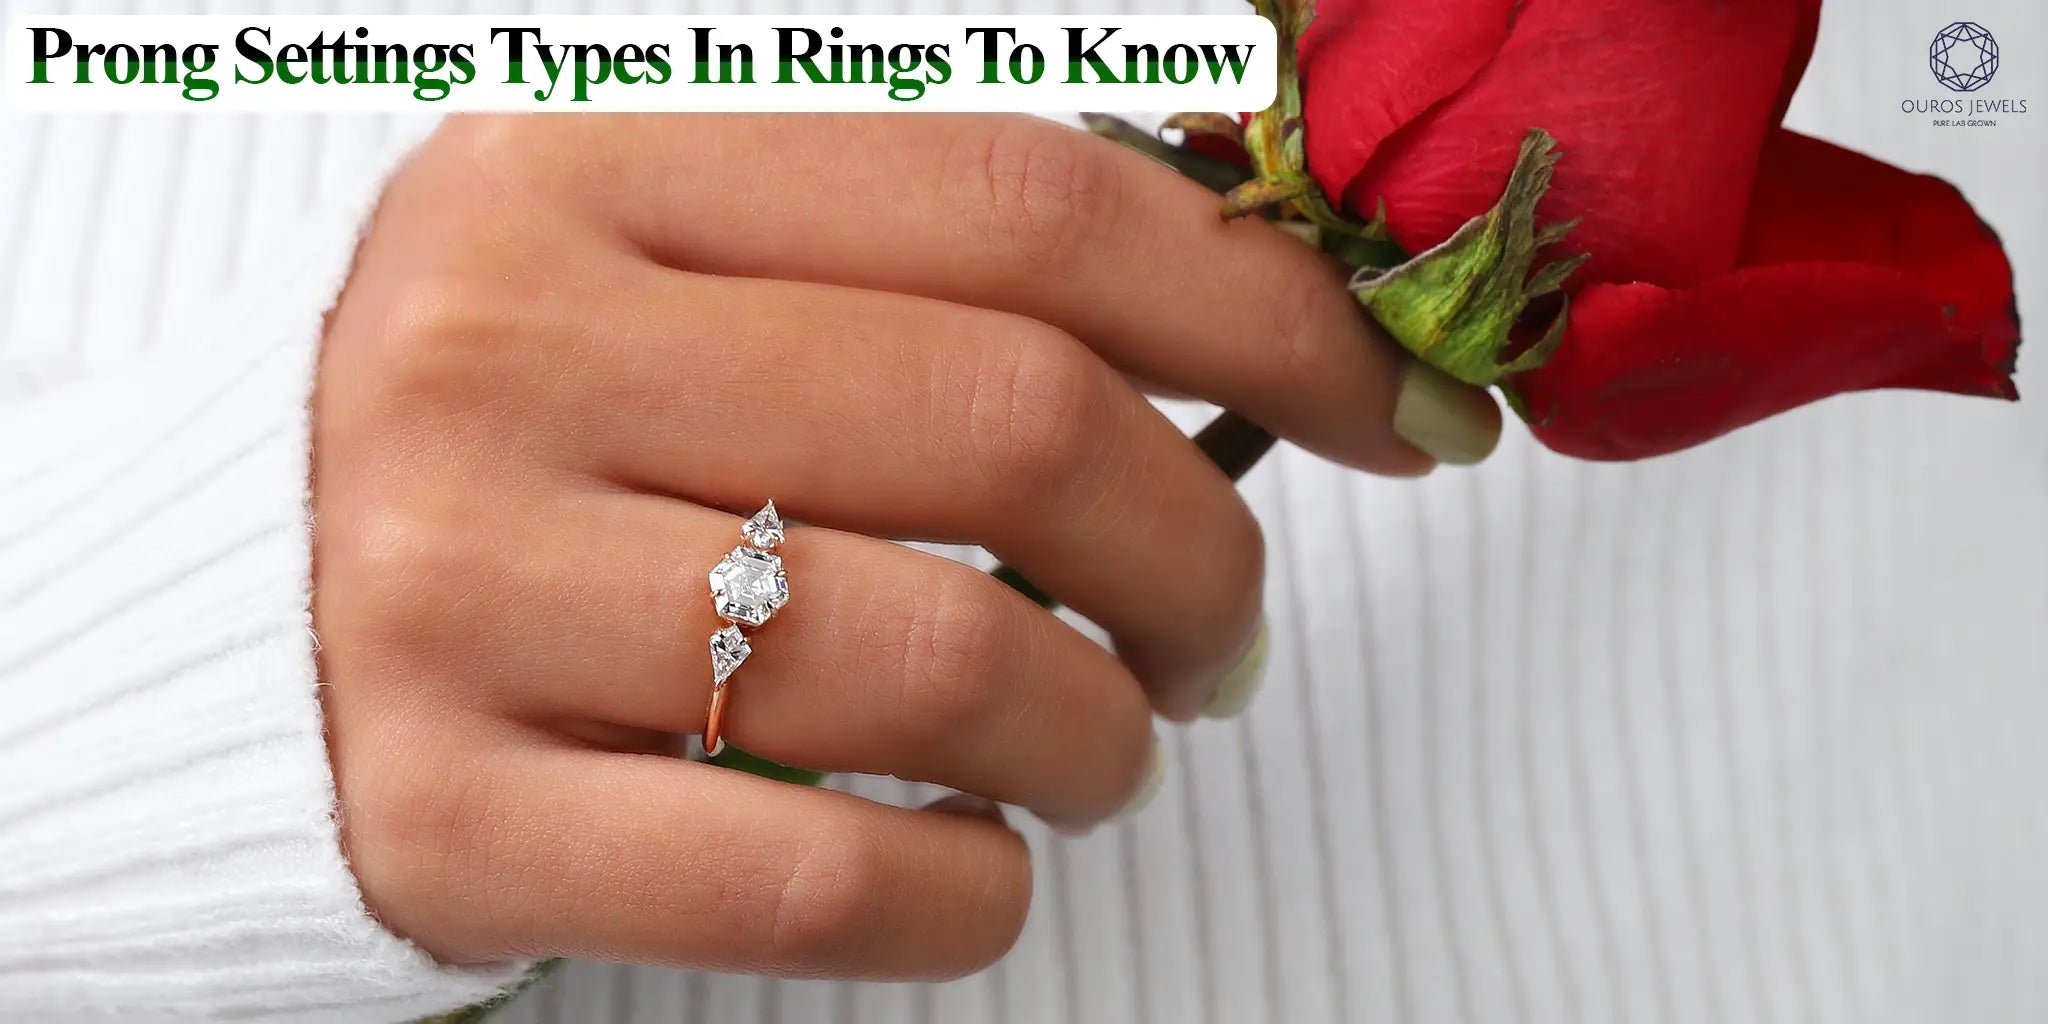 Solitaire Engagement Rings: How To Spot Quality